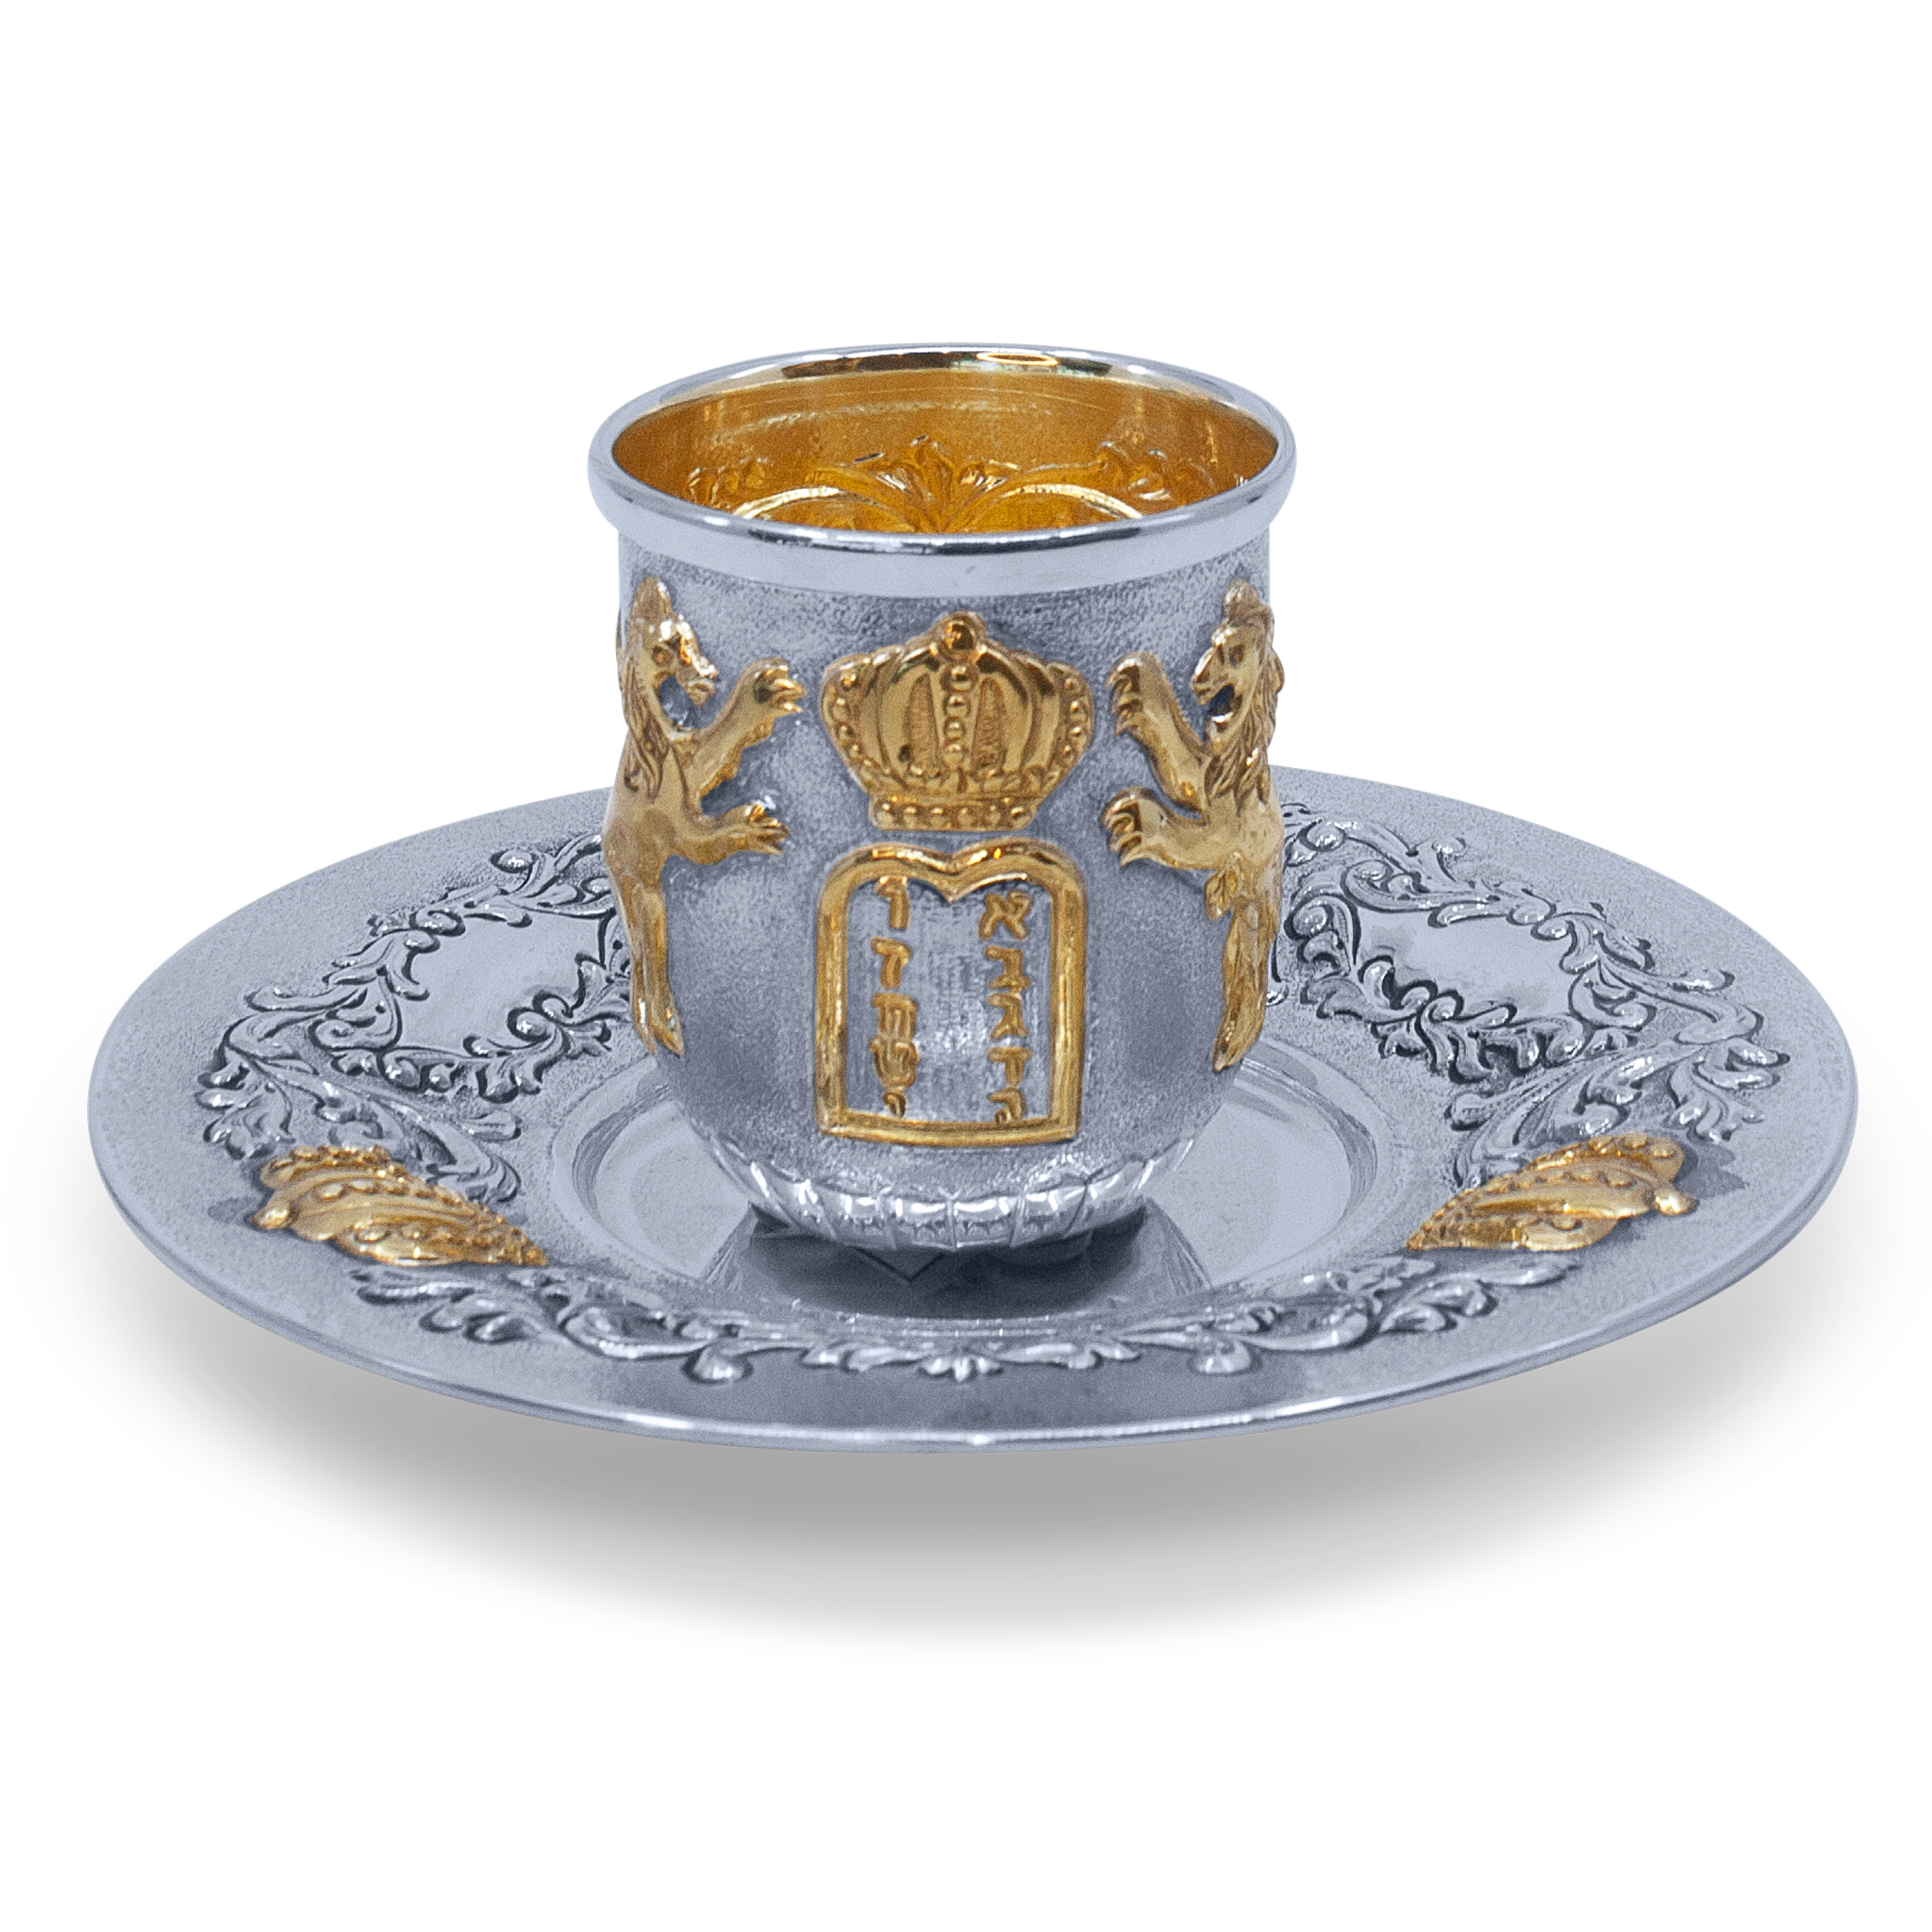 SILVER LION AND CROWNS KIDDUSH CUP SET